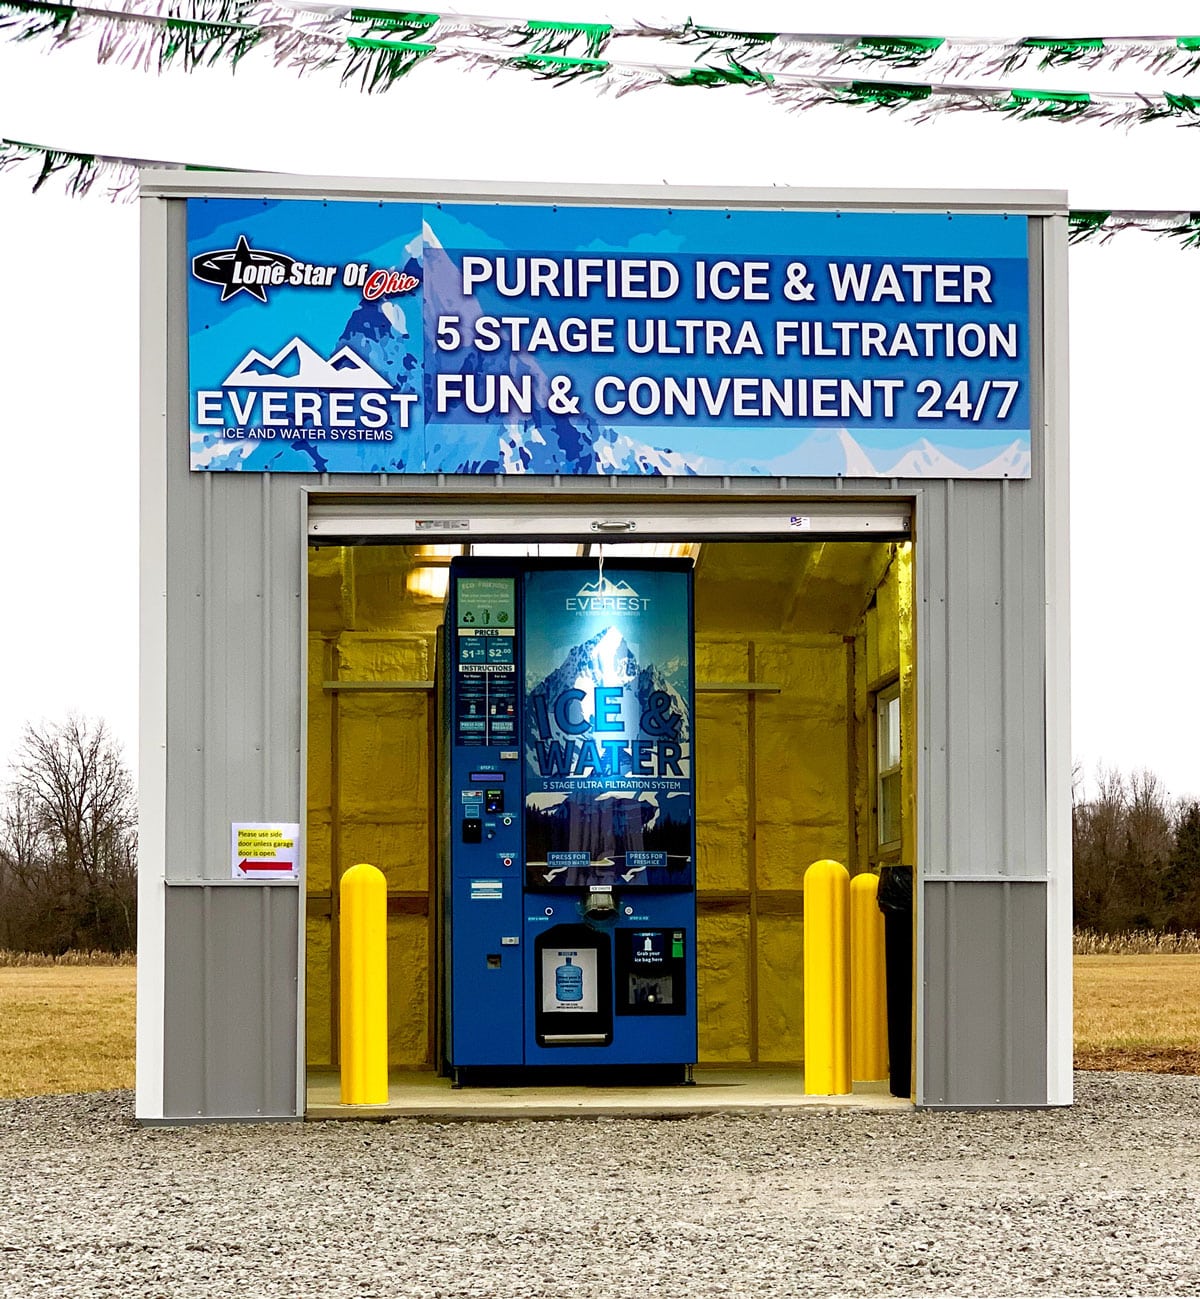 An Everest Ice and Water Vending Machine inside of a portable building